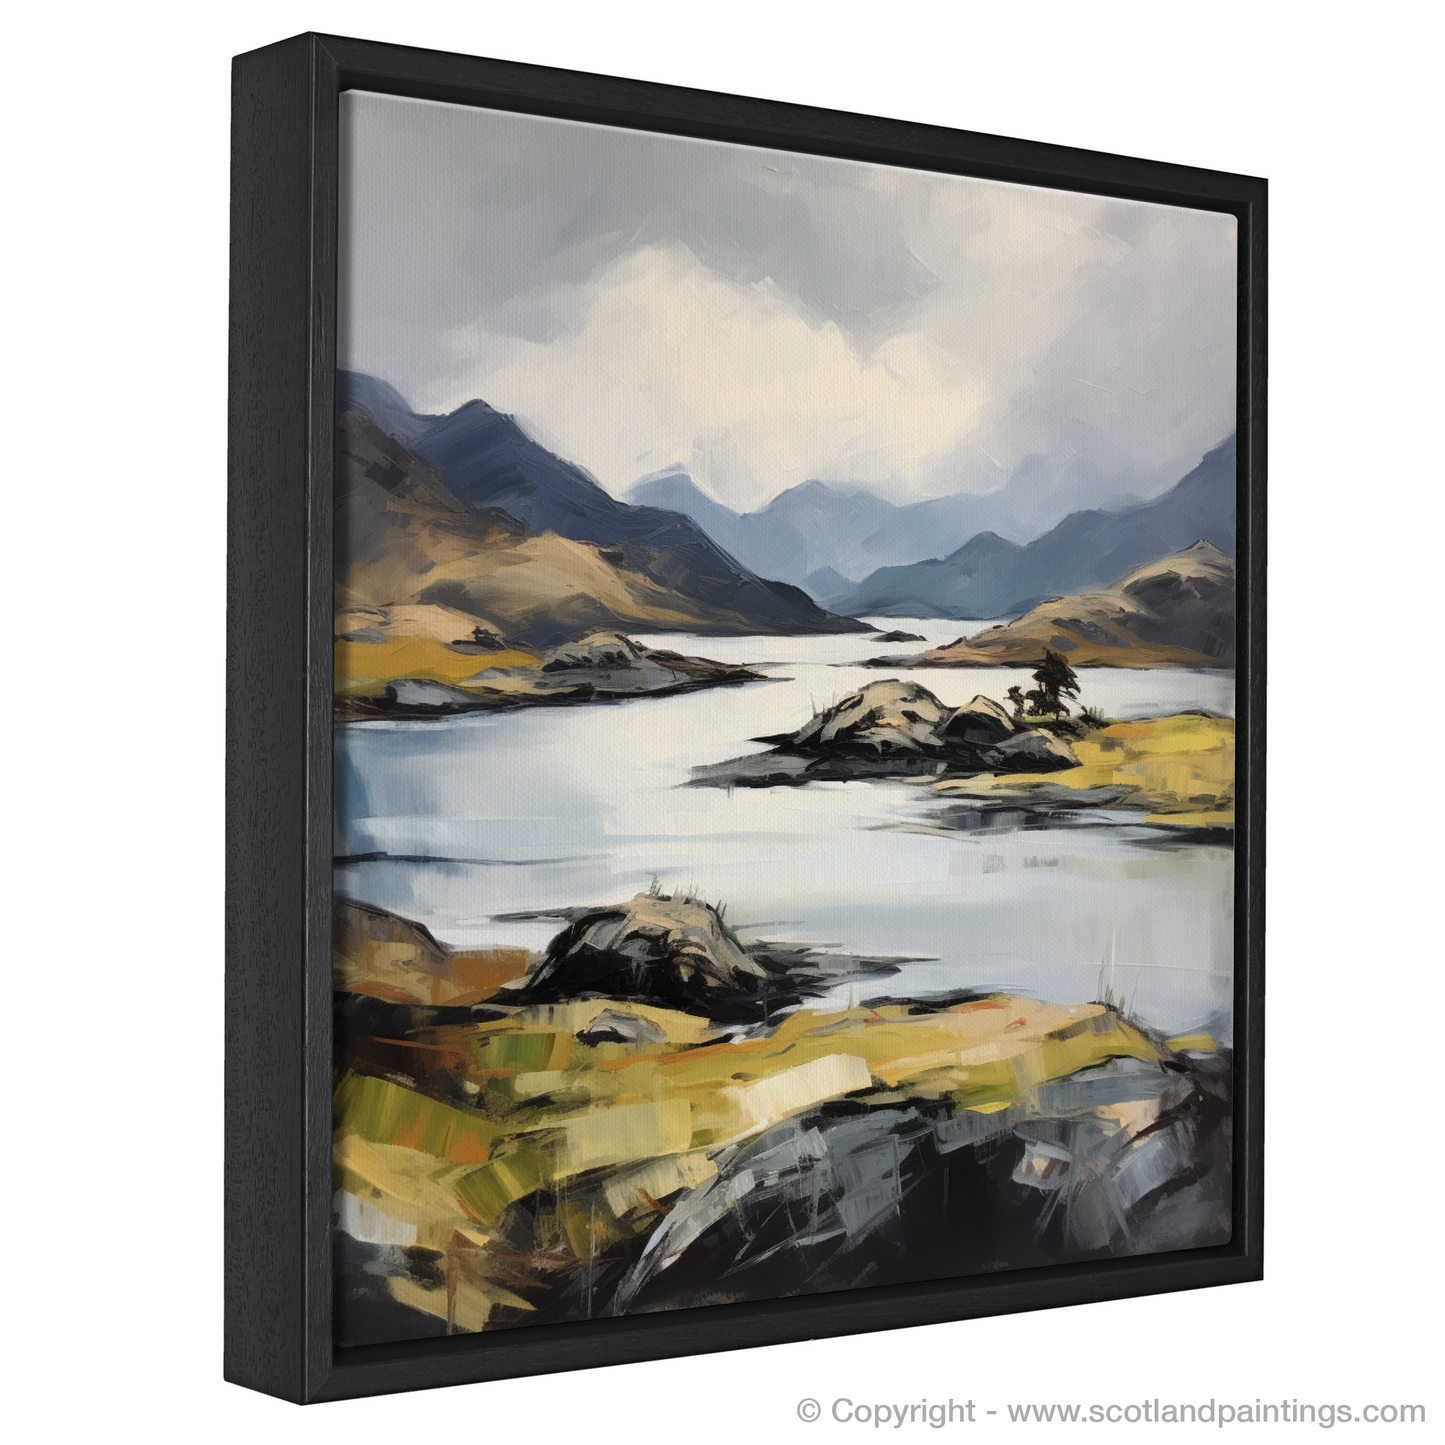 Painting and Art Print of Loch Morar, Highlands entitled "Expressionist Echoes of Loch Morar".